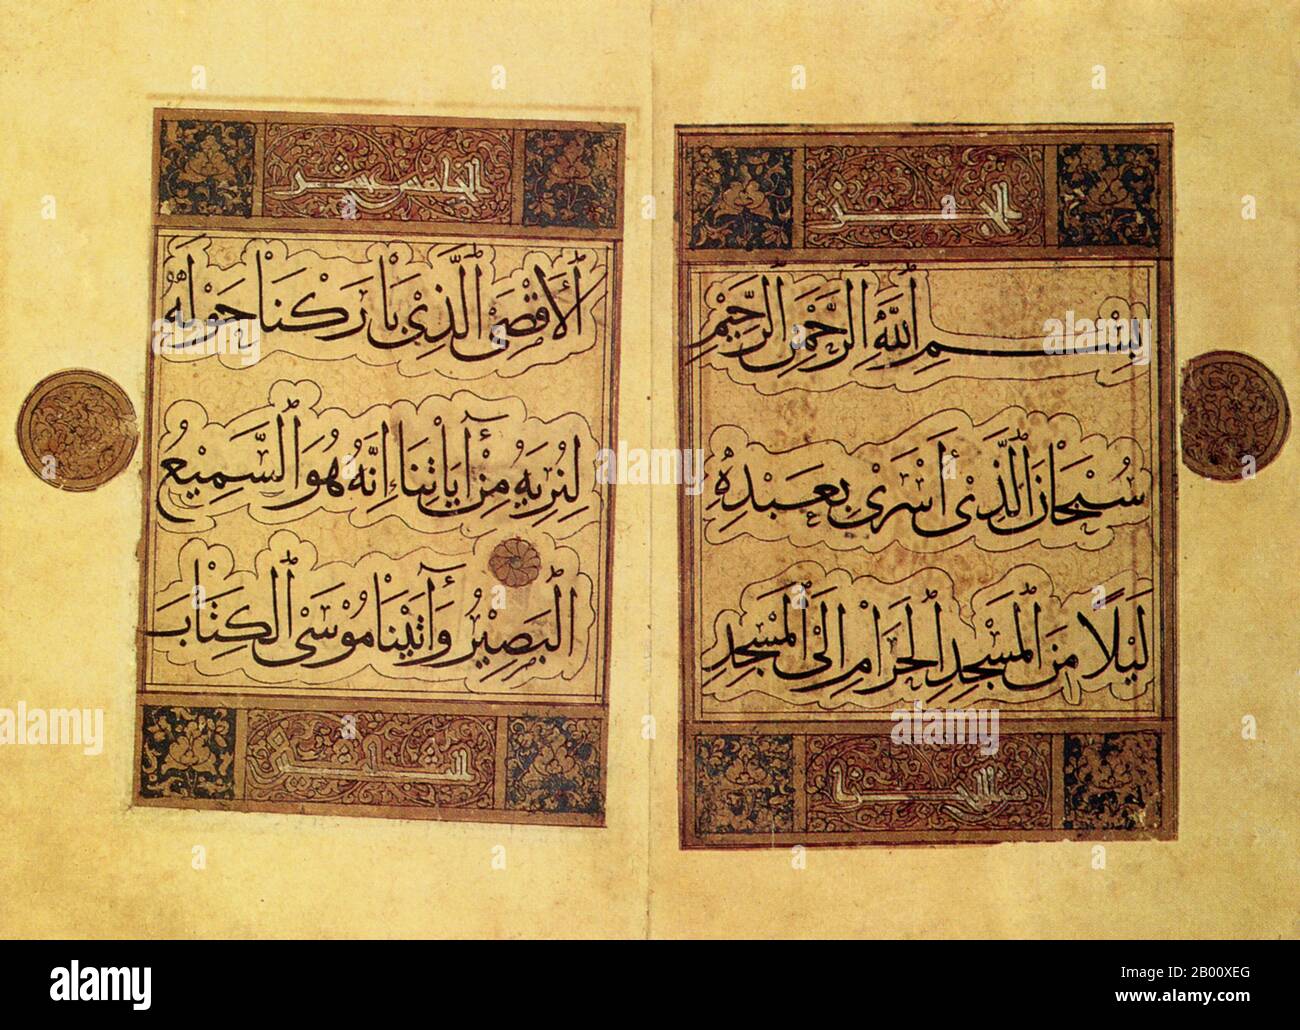 Iraq: Pages from a Qur’an written in Baghdad in 1282-1283 CE by calligrapher Yaqat al-Musta’simi in rare ‘muhaqqaq’ script.    Muhaqqaq is a type of calligraphic script in Arabic derived from Thuluth by widening the horizontal sections of the letters in the Thuluth script. It was abandoned after the 16th century and only a very few examples survive. Stock Photo